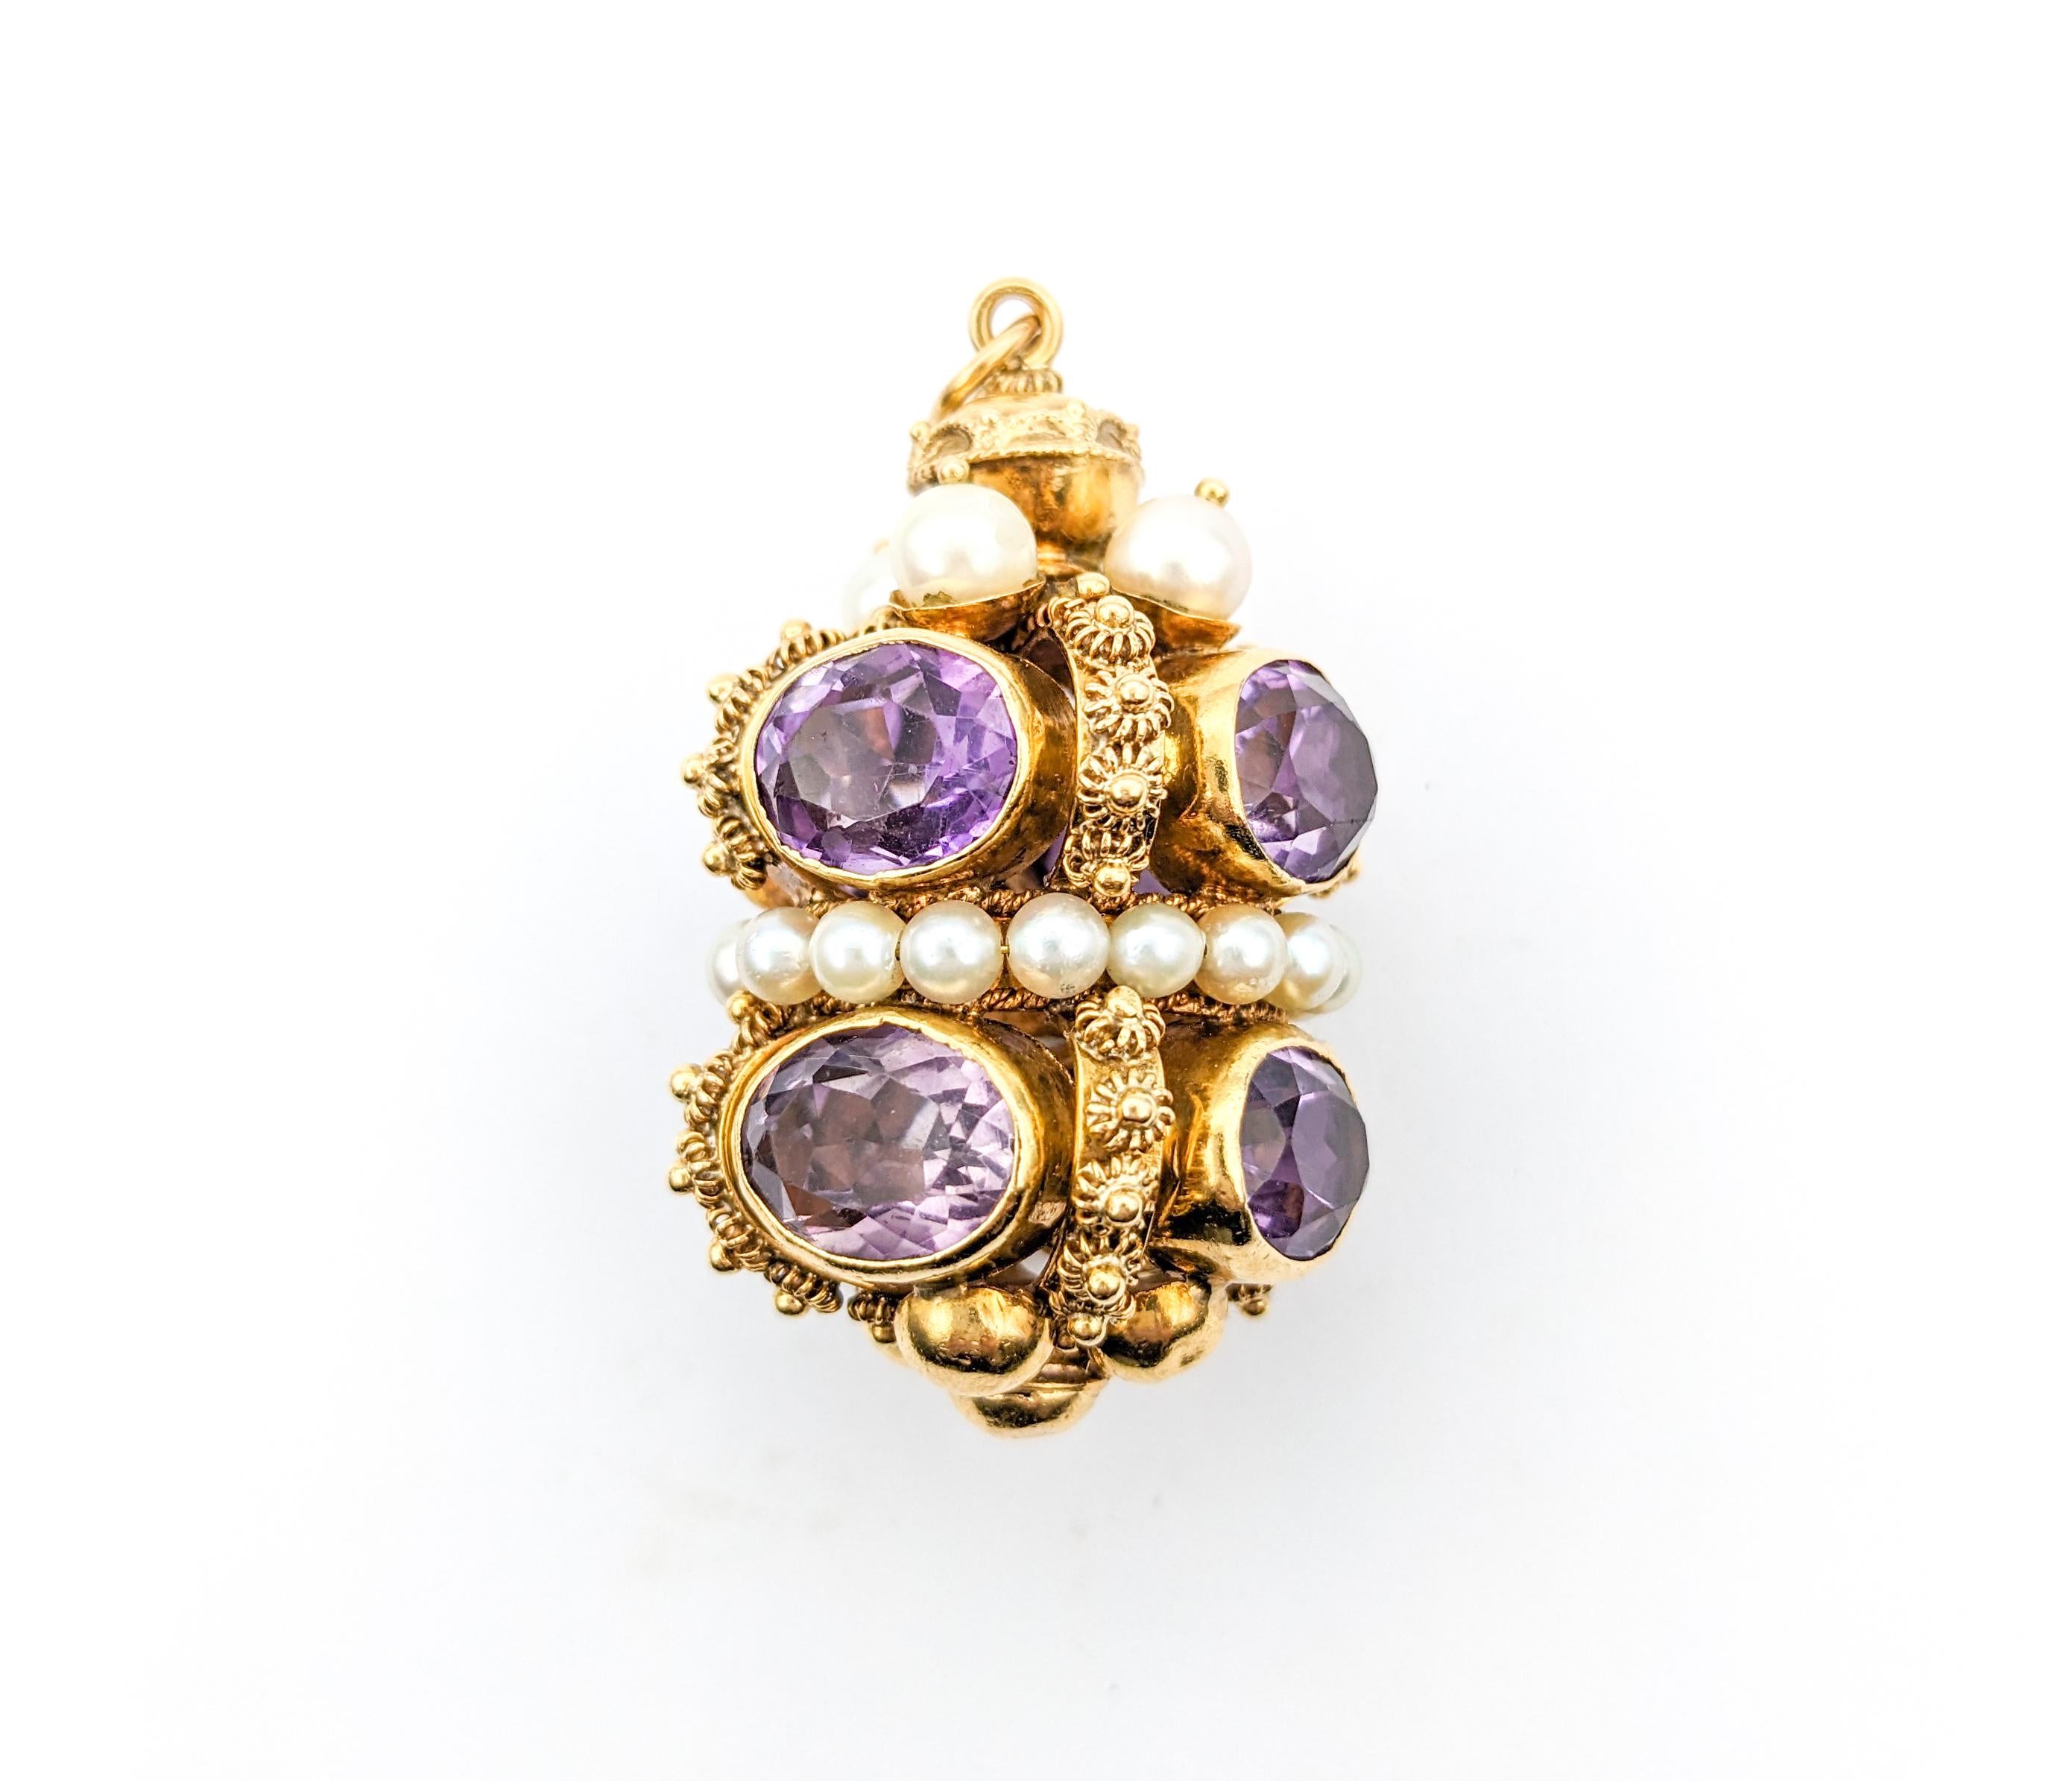 Etruscan Revival 18K Gold, Amethyst & Pearl Fob Pendant For Sale 2